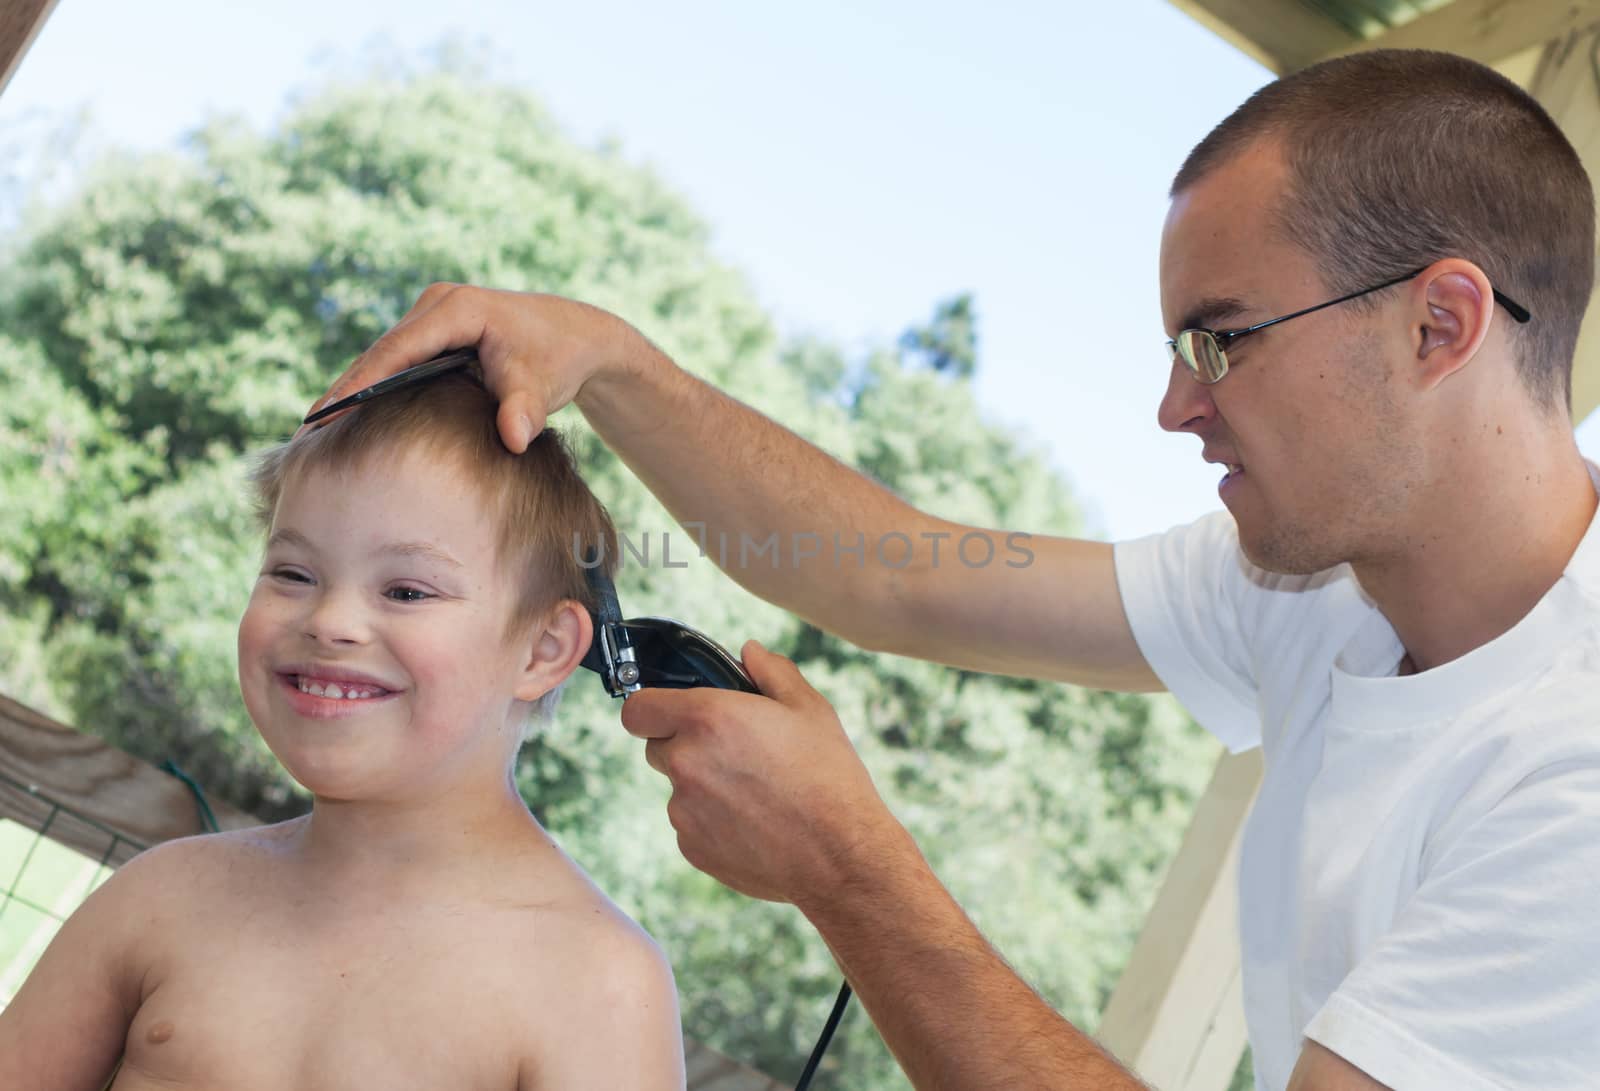 Cute Little Boy With Downs Syndrome Geting His Haircut